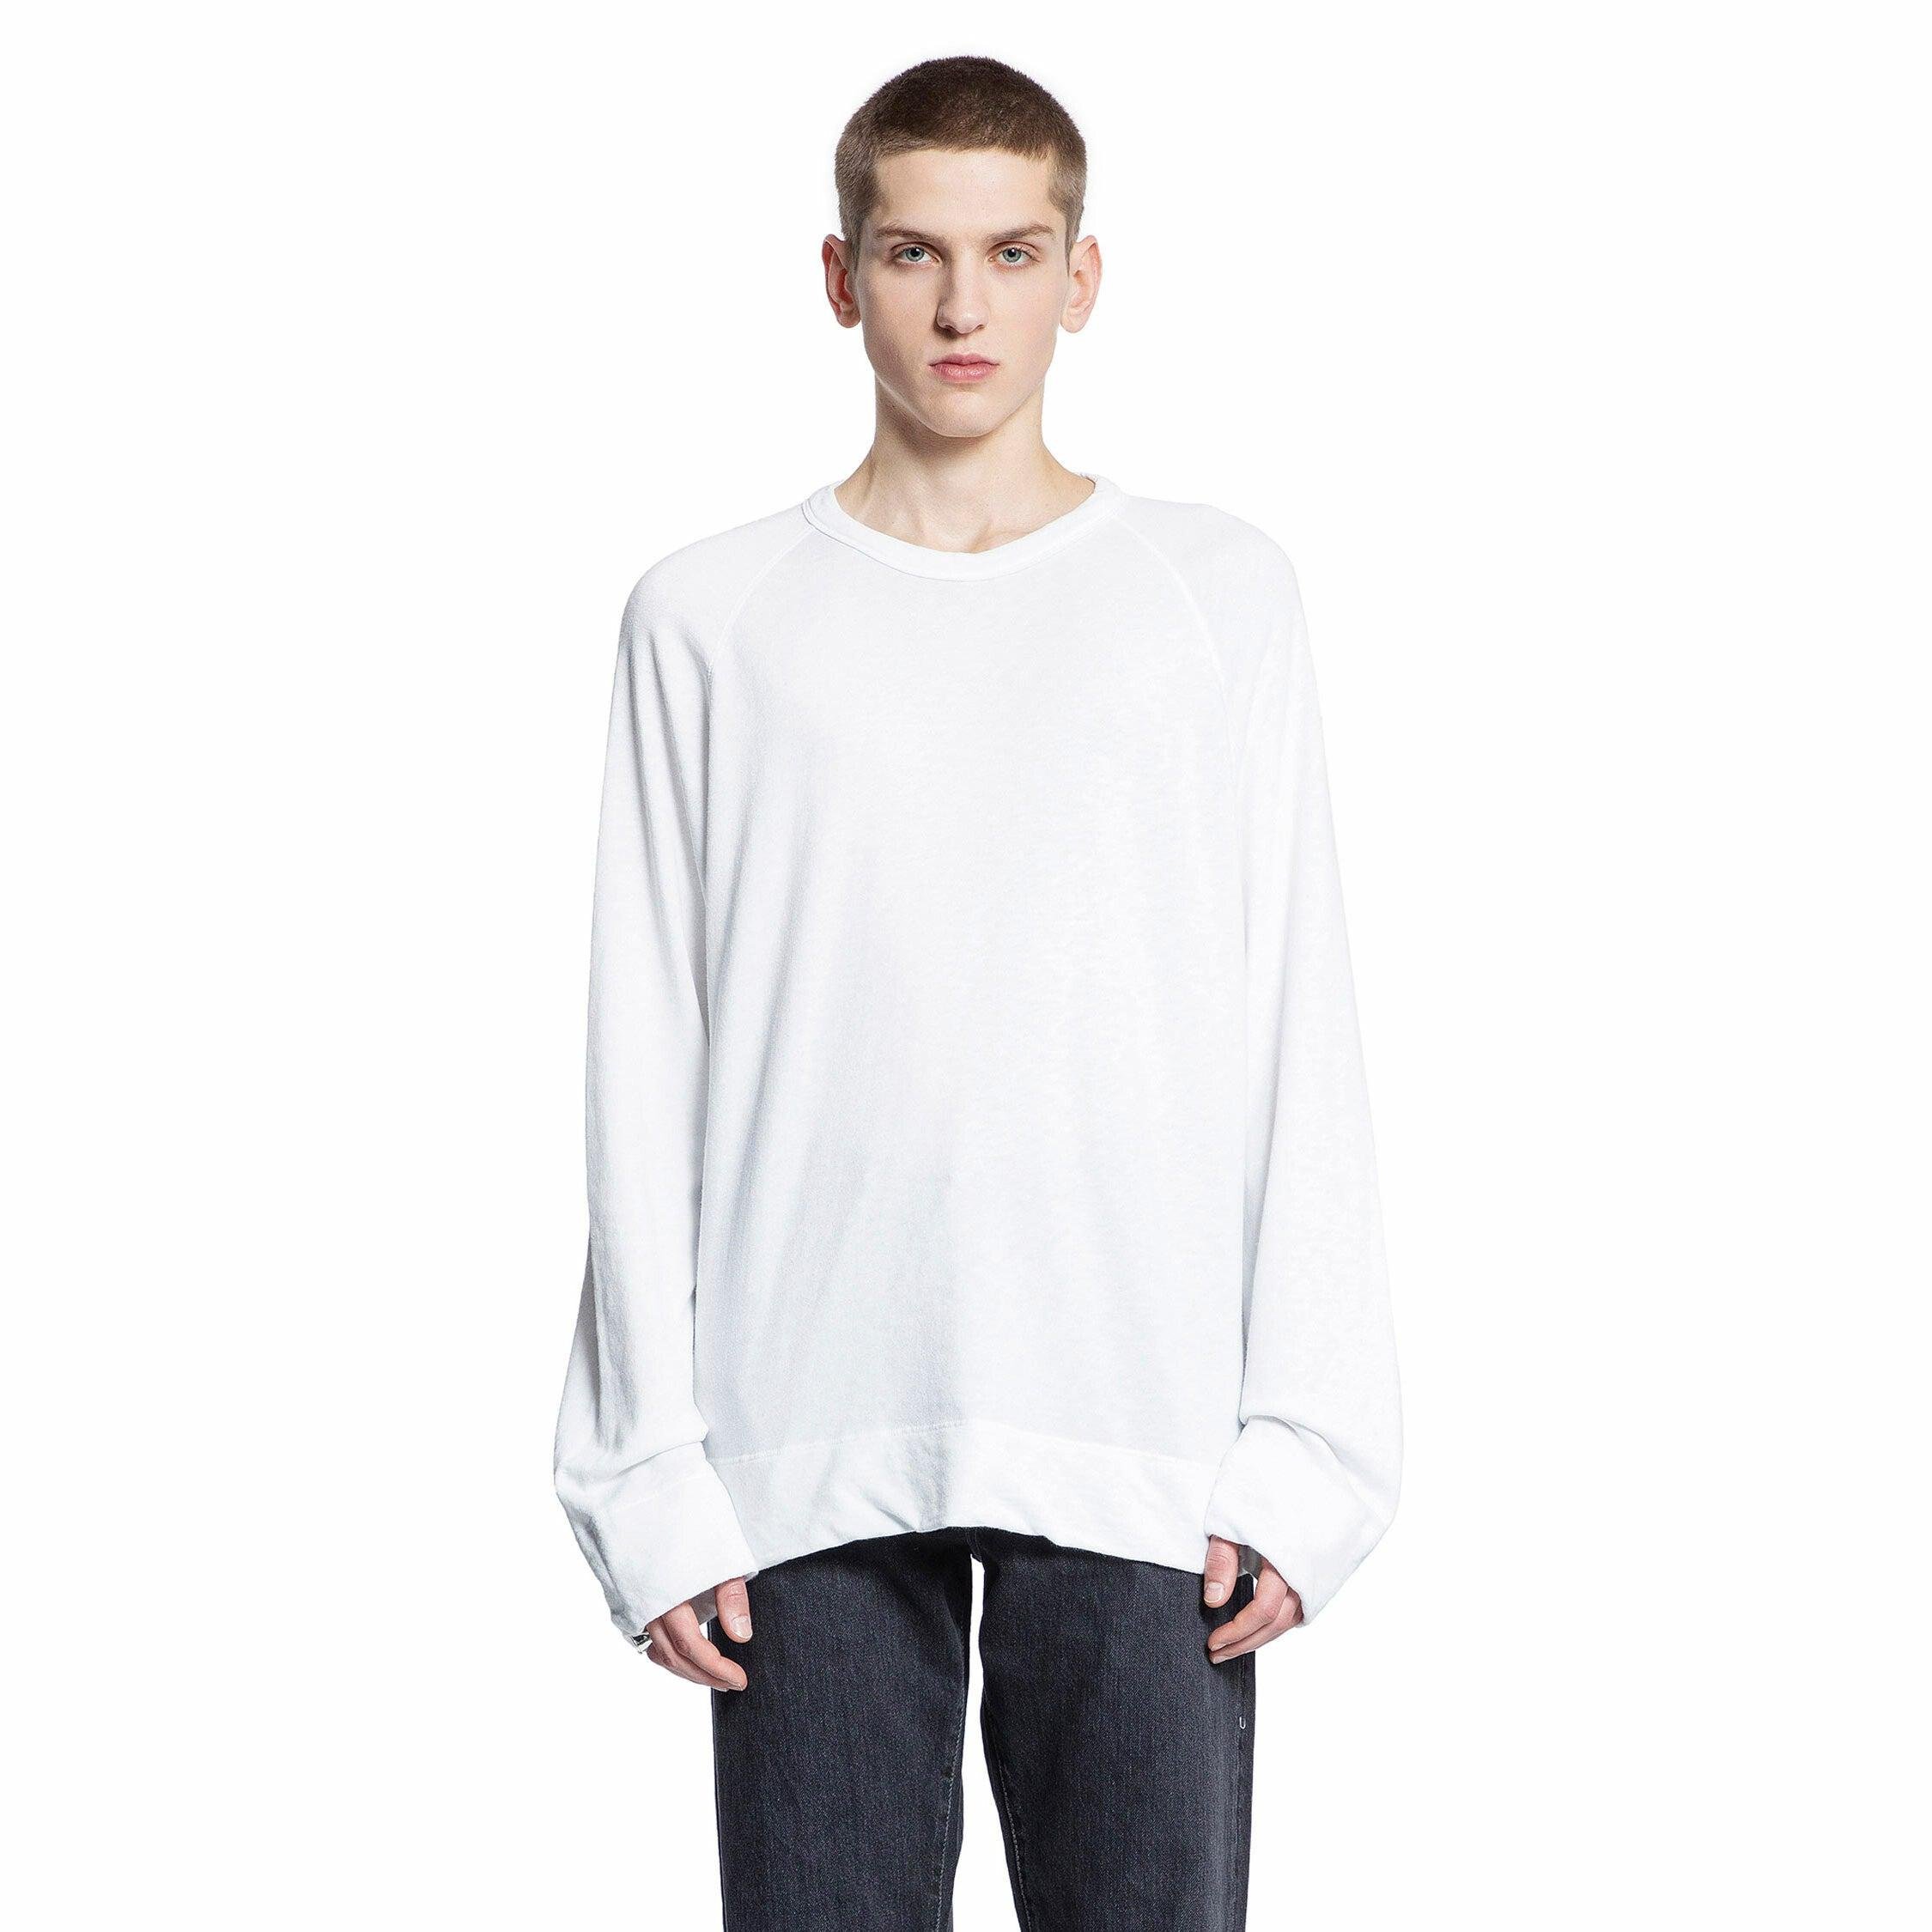 JAMES PERSE MAN WHITE SWEAT-SHIRTS by JAMES PERSE